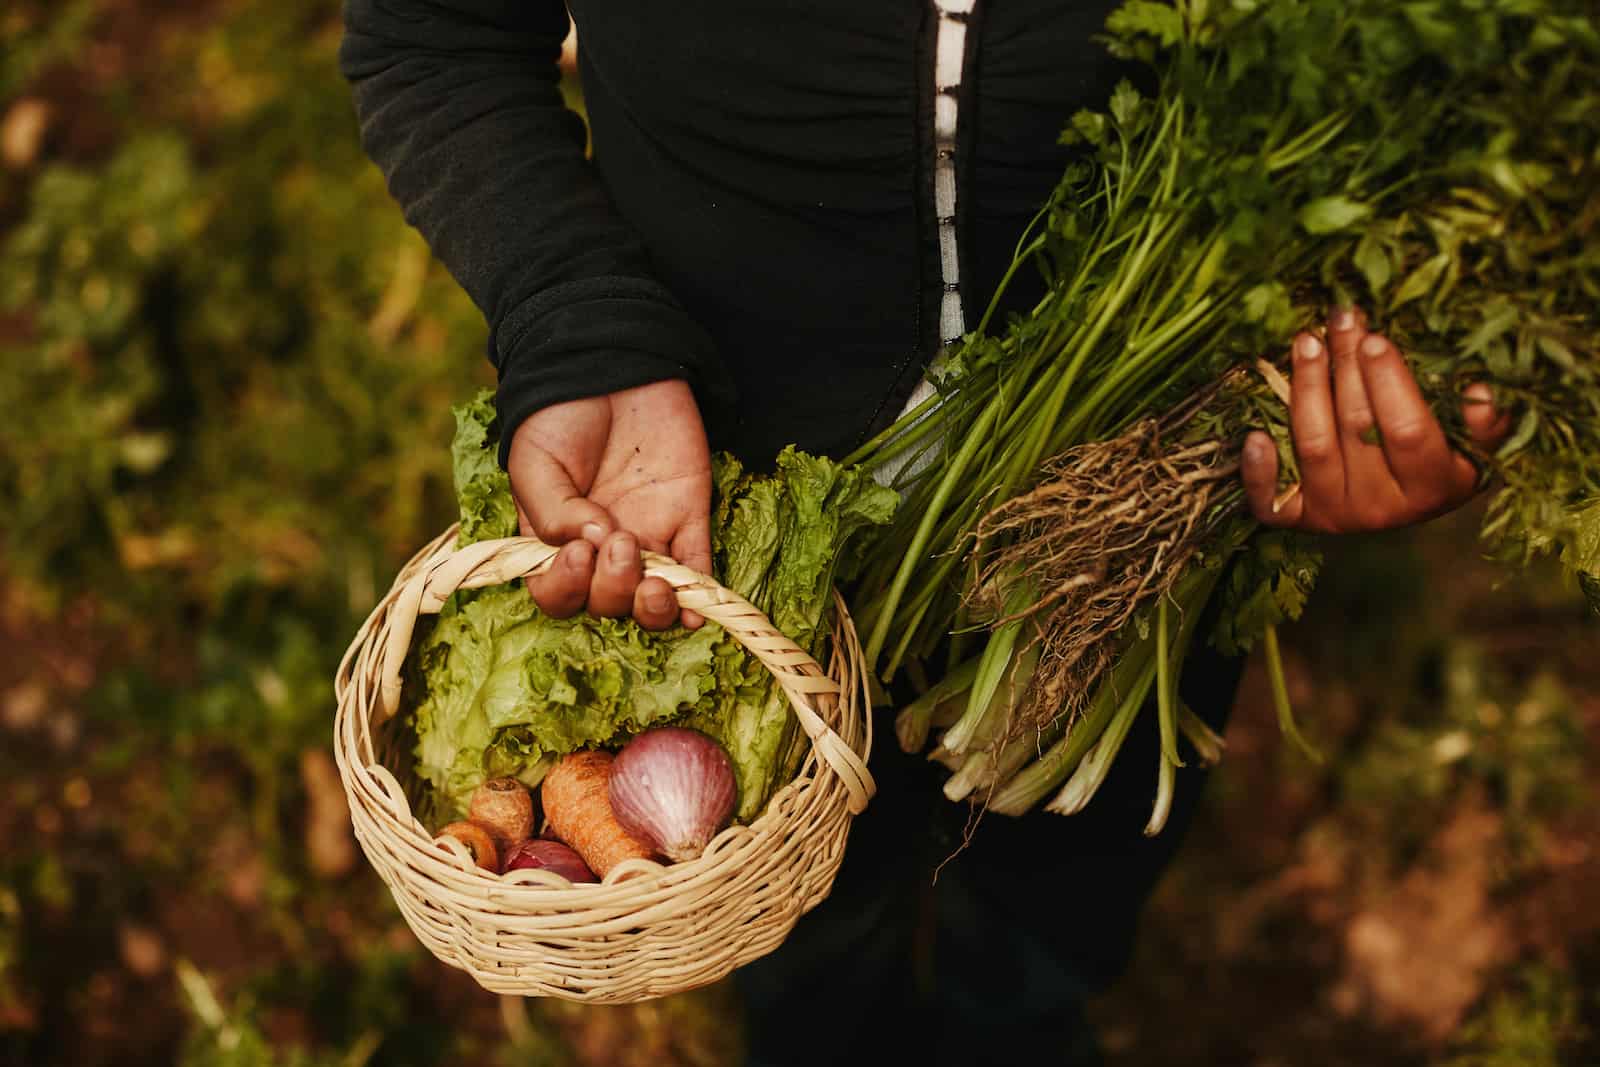 A girl holds a basket full of vegetables and holds vegetables in her arms.